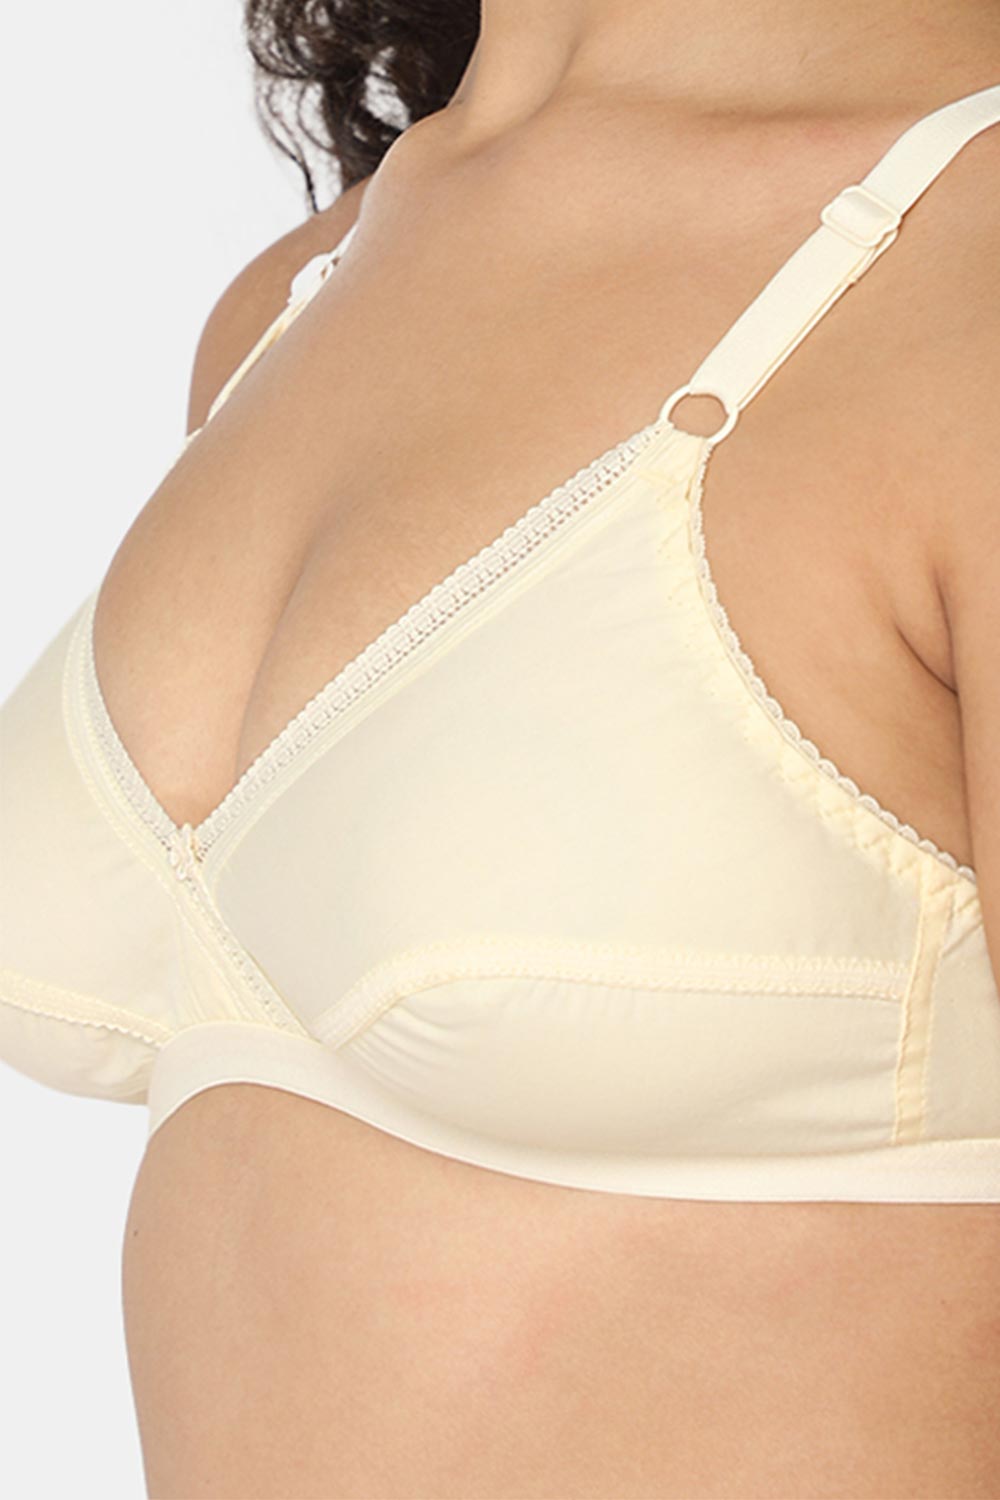 Naidu Hall Heritage-Bra Special Combo Pack - Lovable - C35